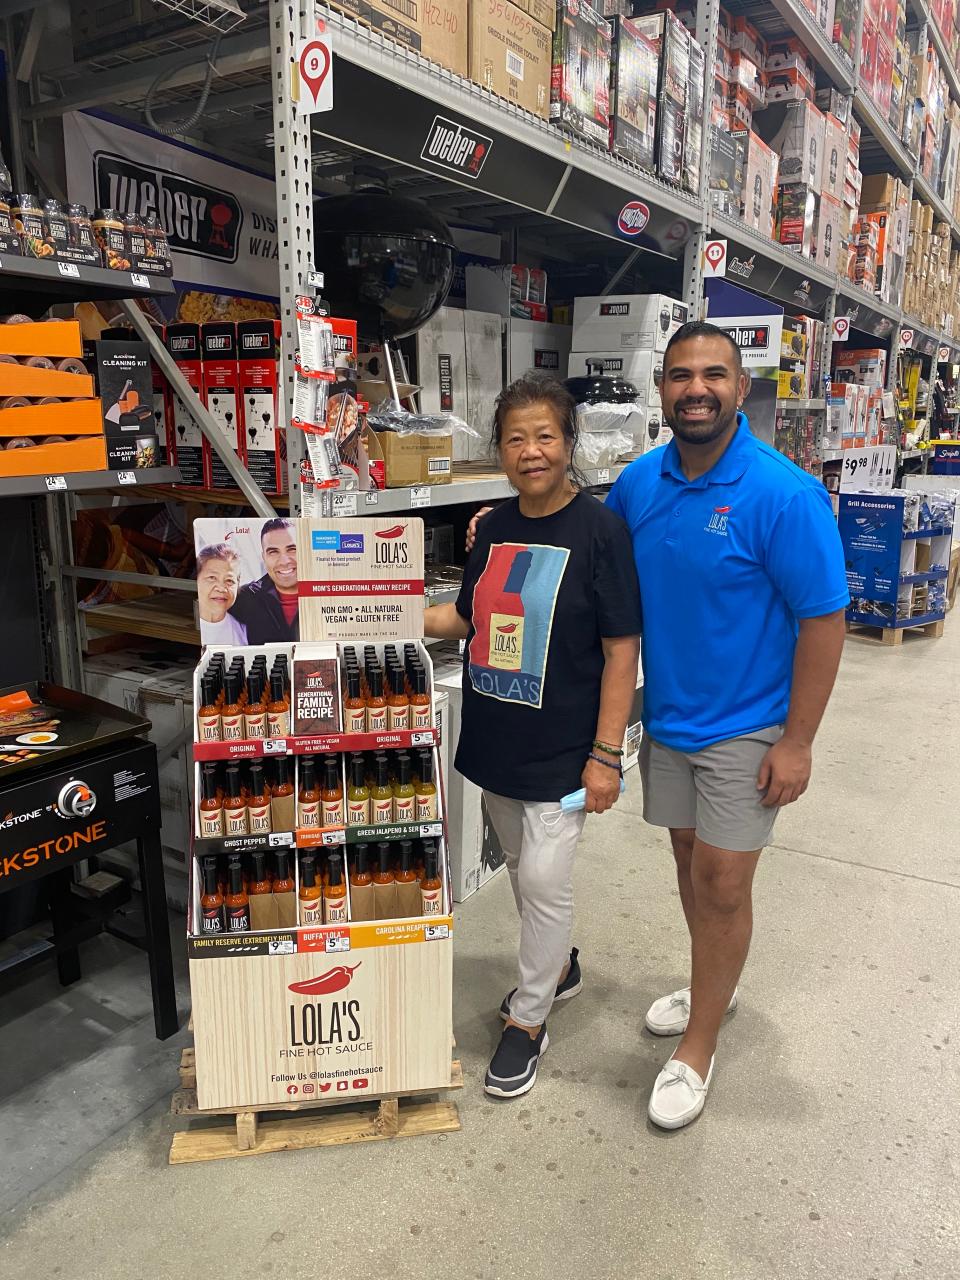 Taufeek and Carmelita Shah, the mother-and-son team behind Lola's Fine Hot Sauce, pose for a picture next to their display in Lowe's.